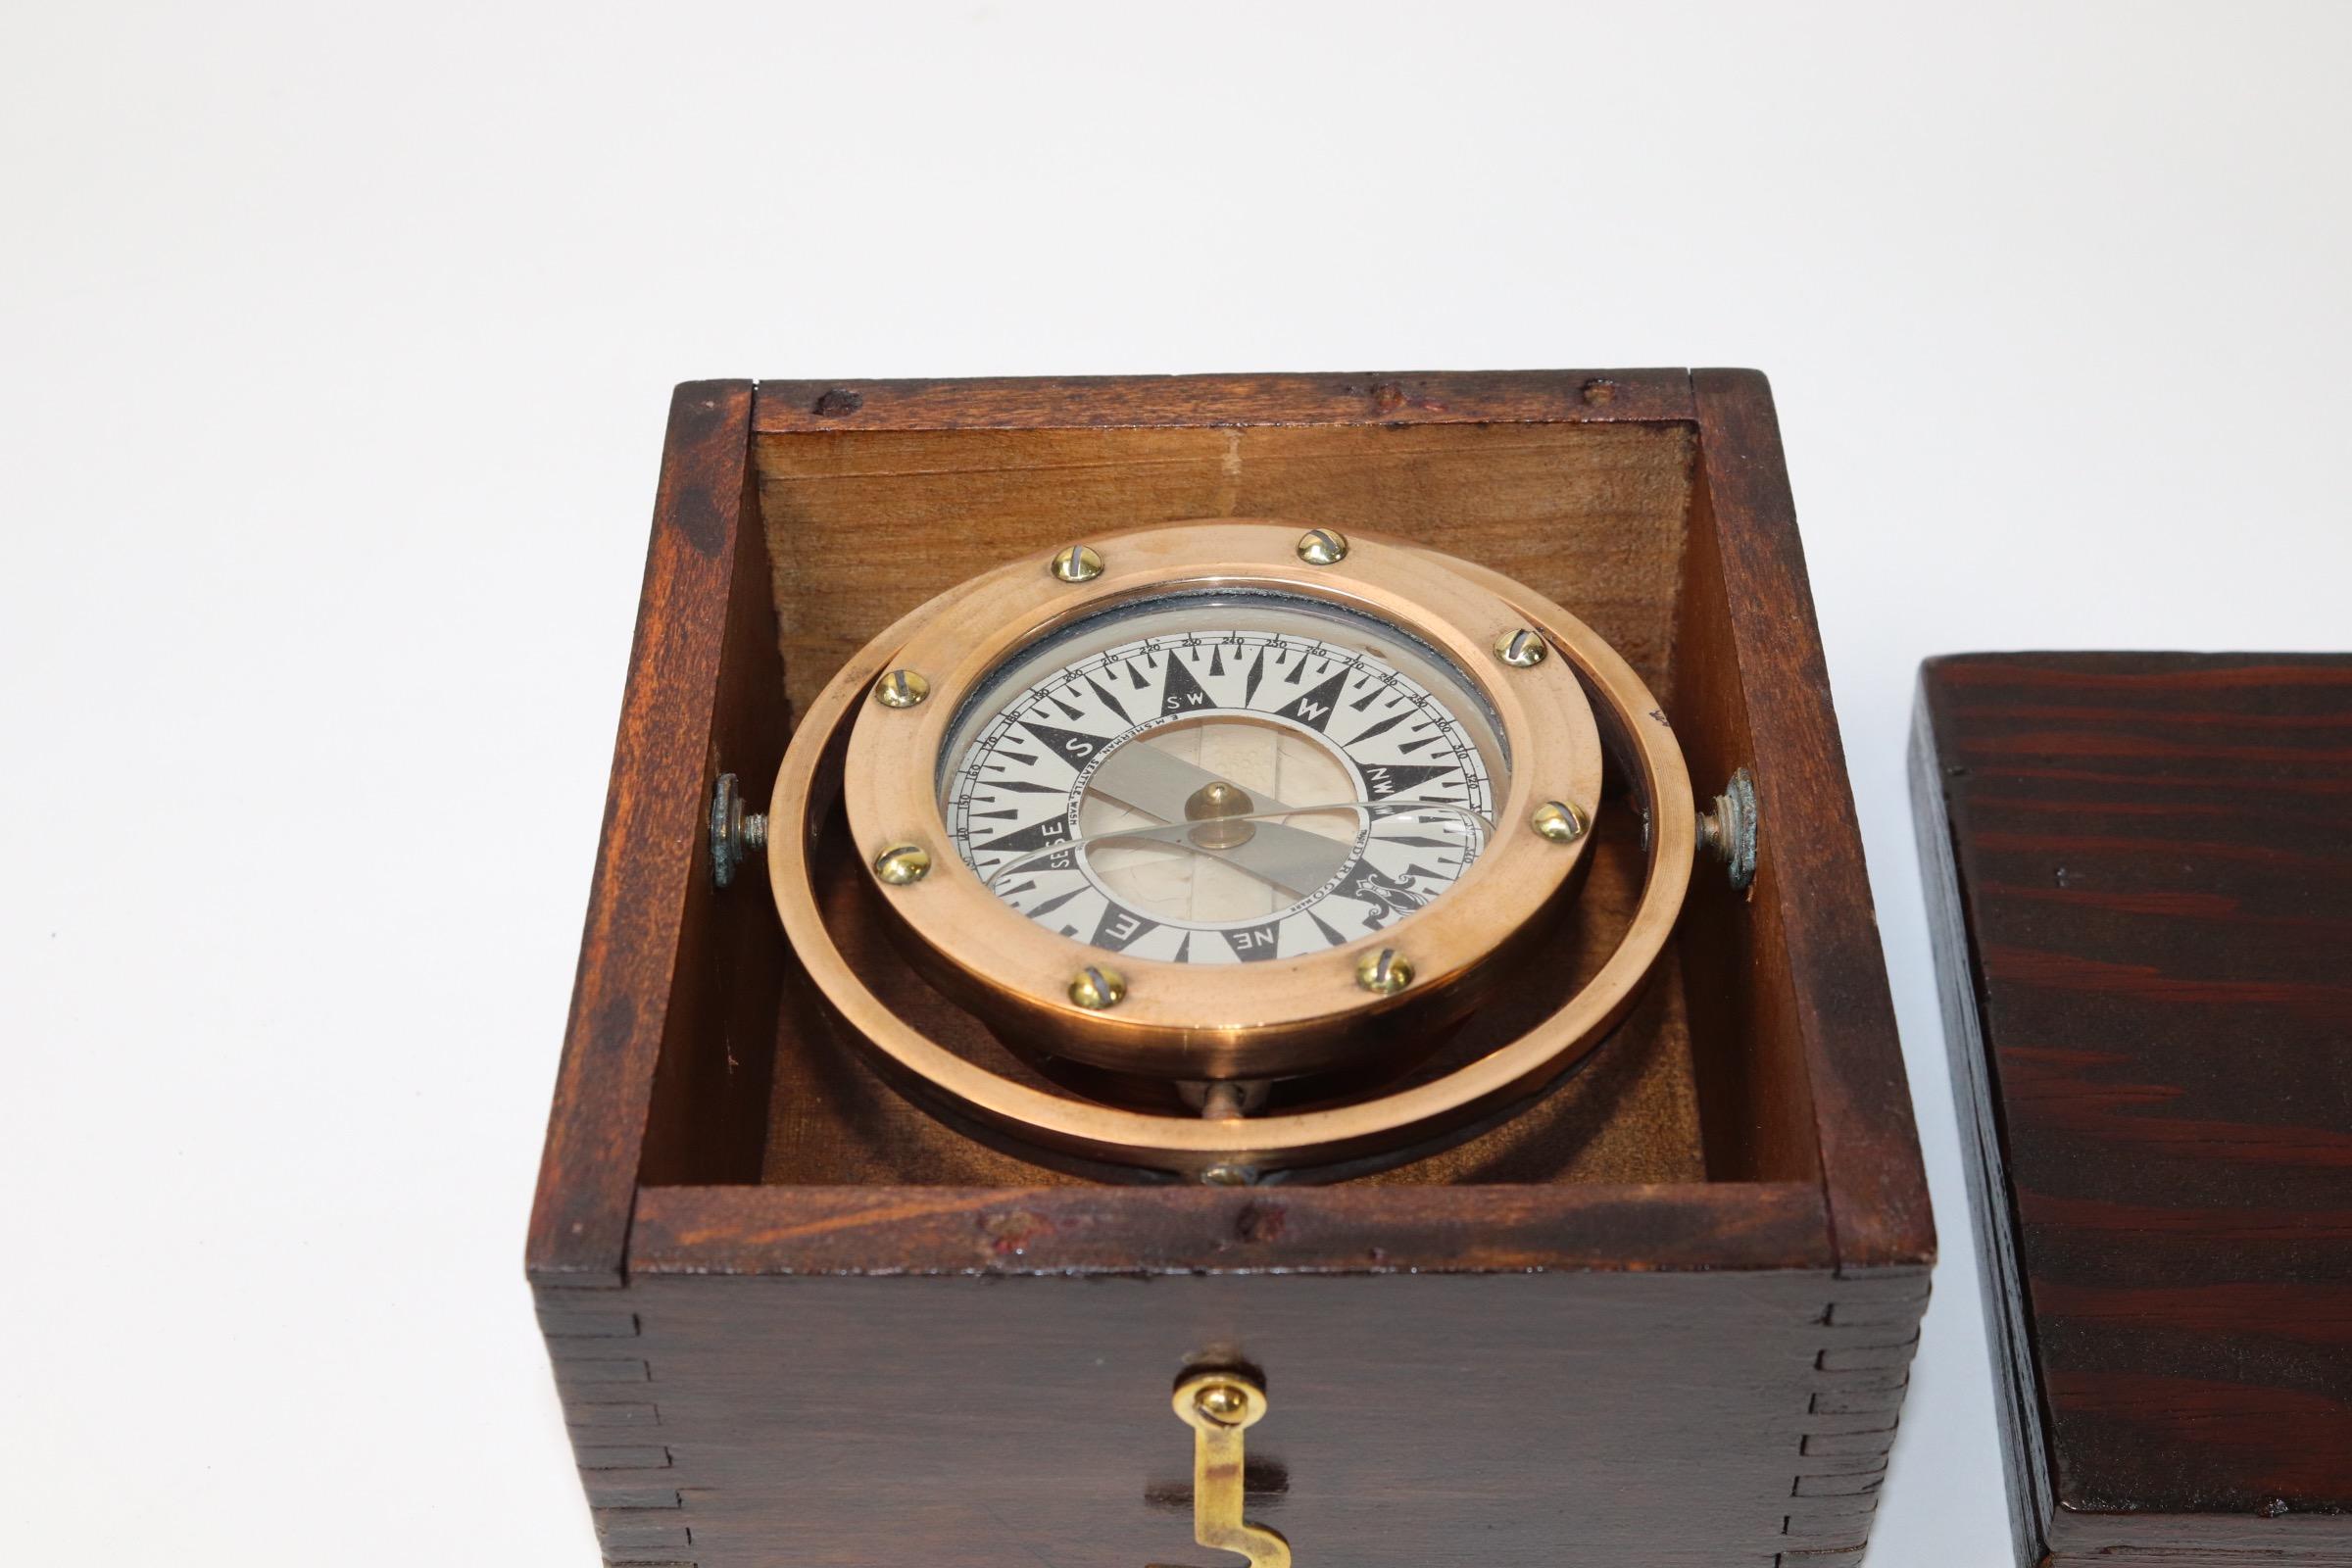 Polished brass boat compass by Dirigo mounted into a varnished wood box with lid and polished brasses. Weight is 3 pounds.